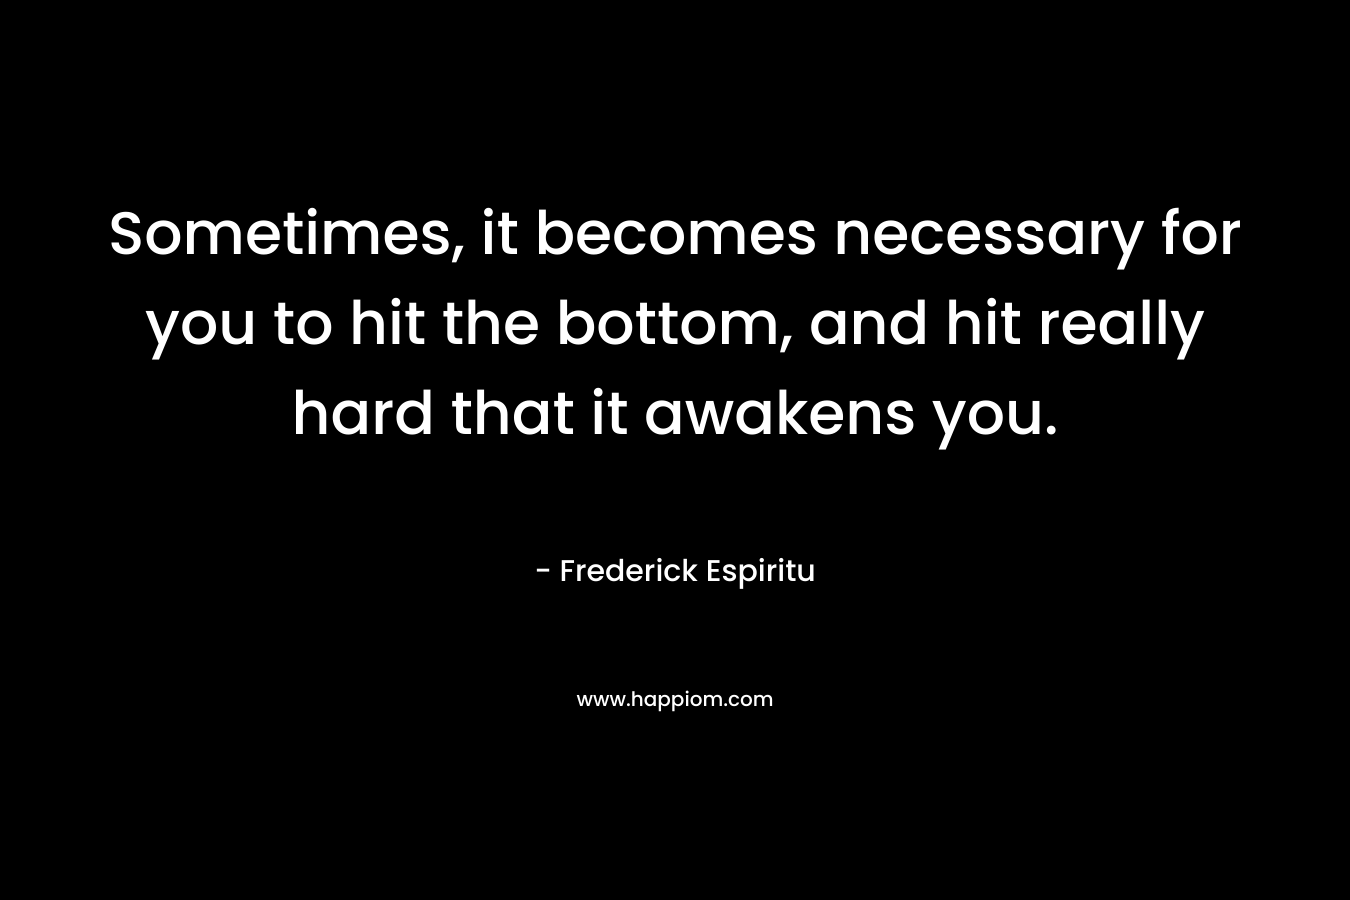 Sometimes, it becomes necessary for you to hit the bottom, and hit really hard that it awakens you.